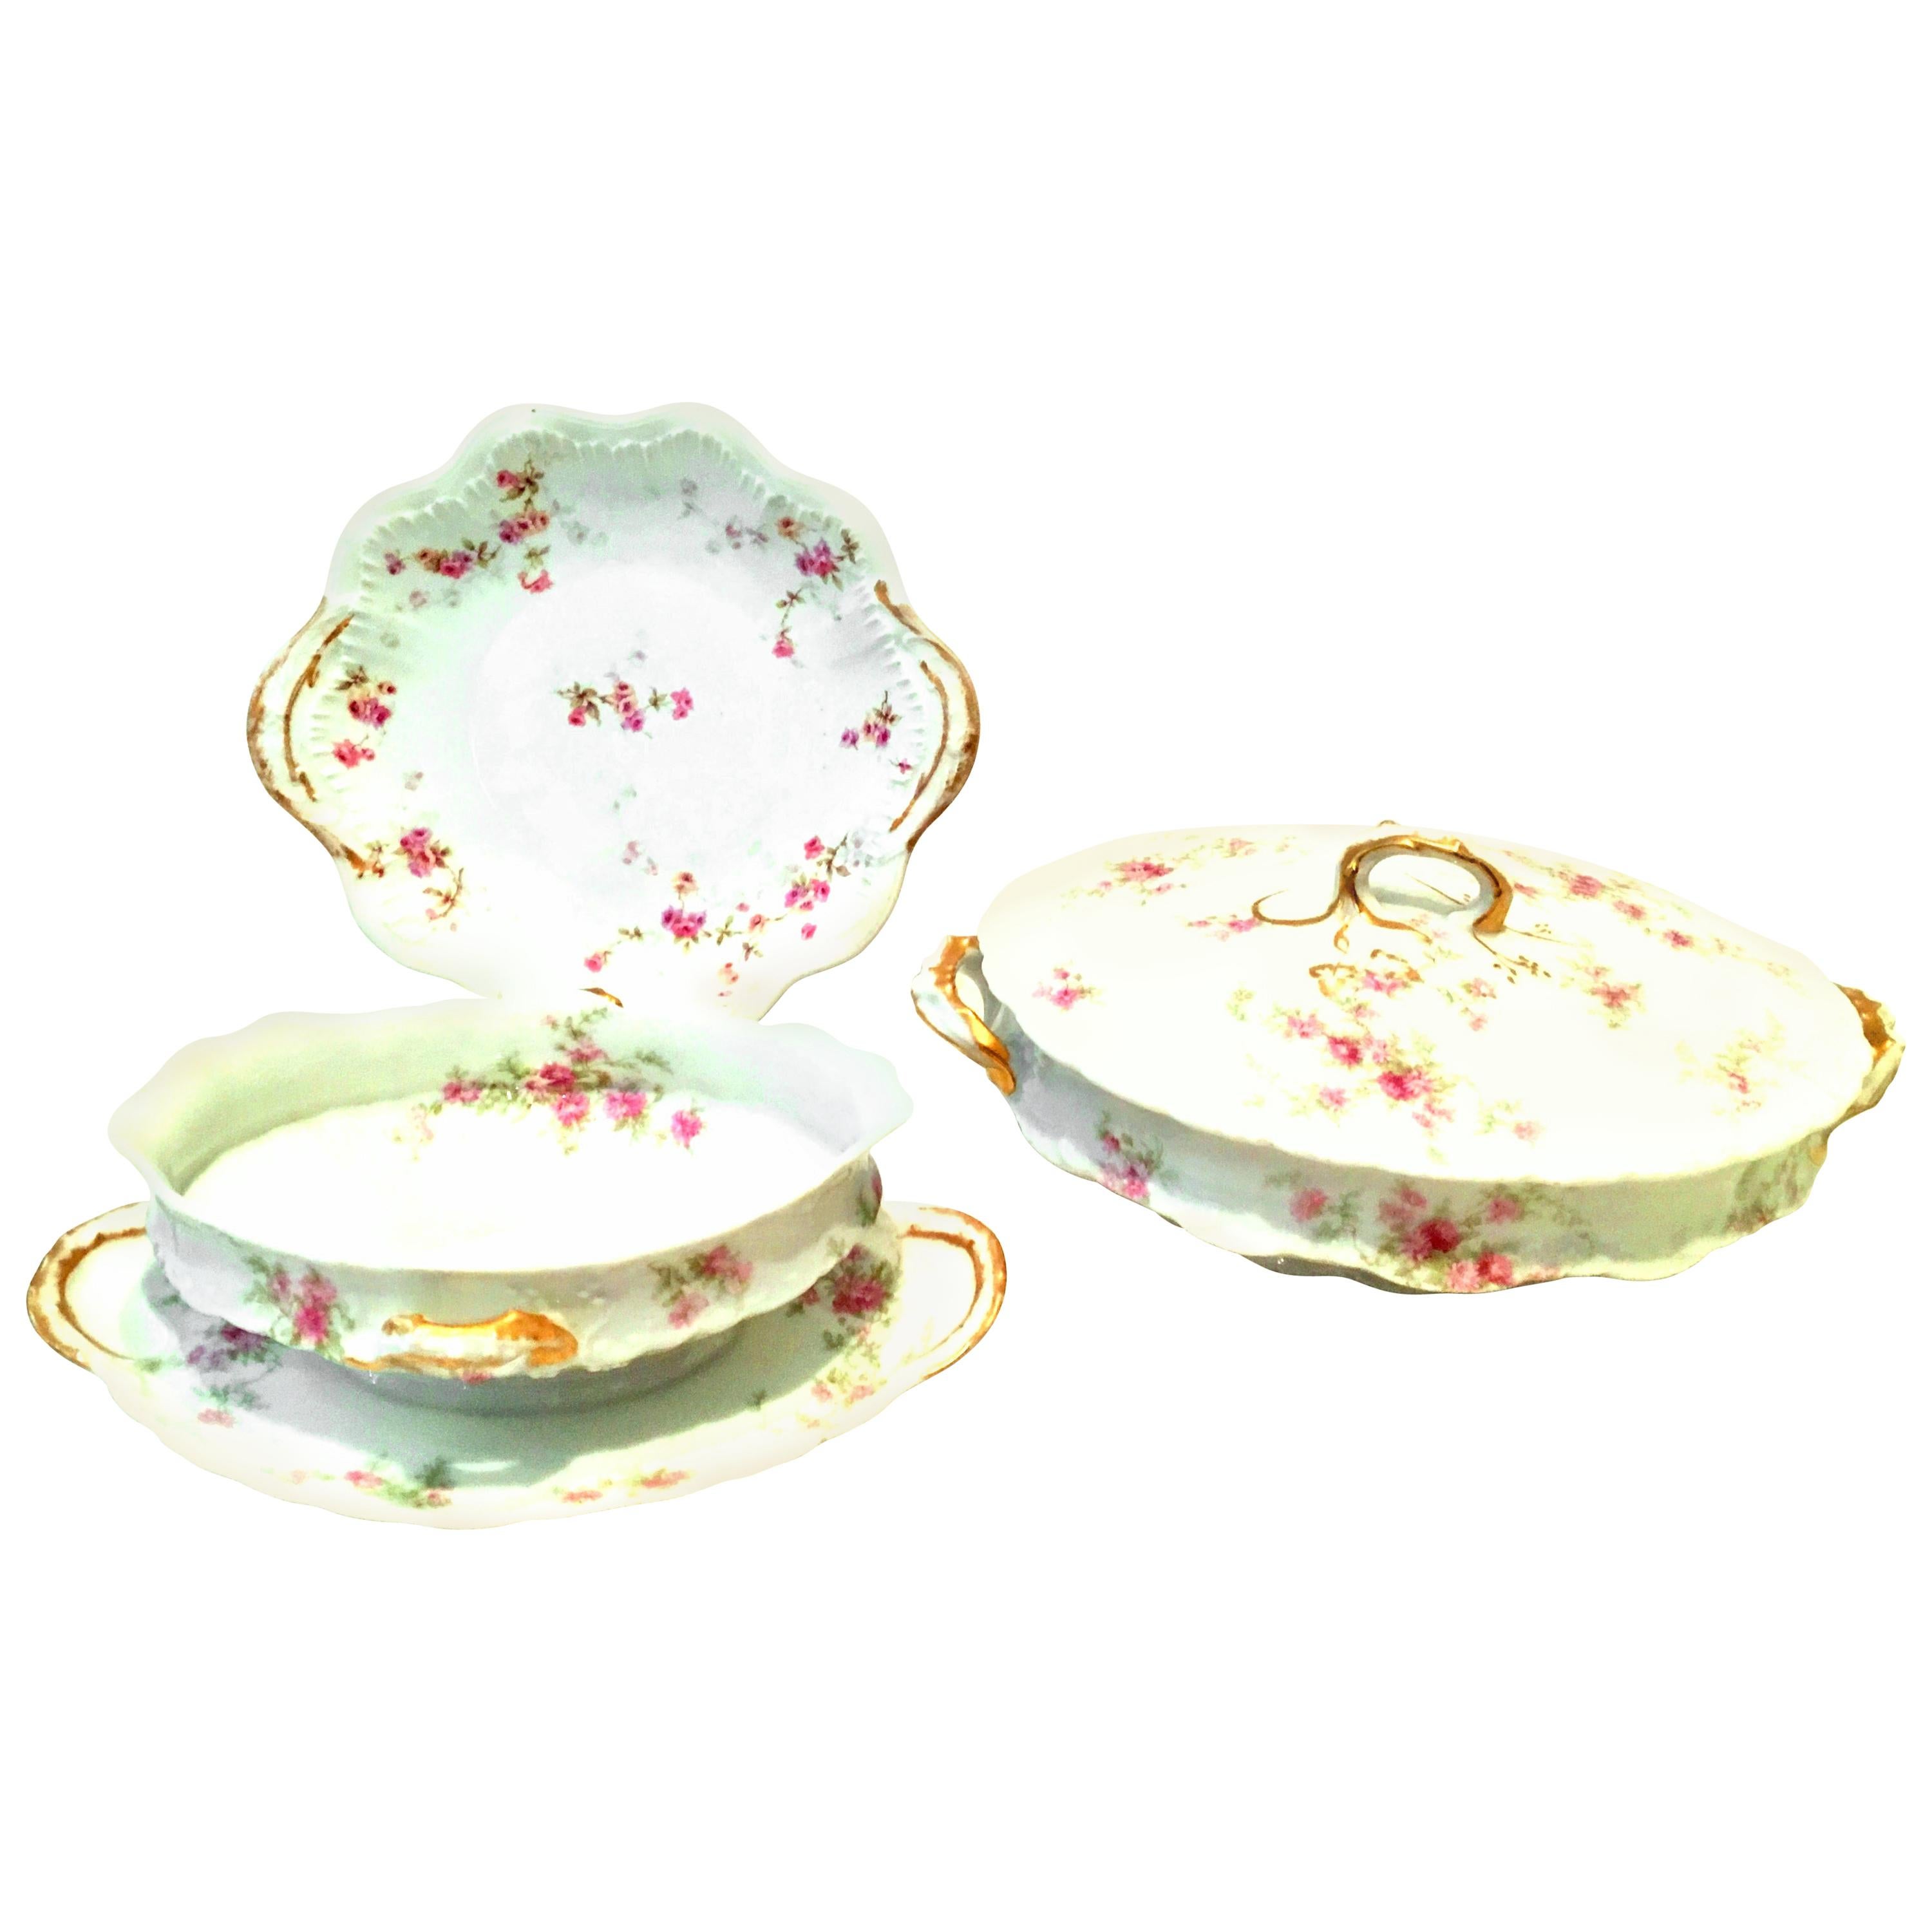 20th Century French Limoges Set of Three Serving Pieces by, Theodore Haviland